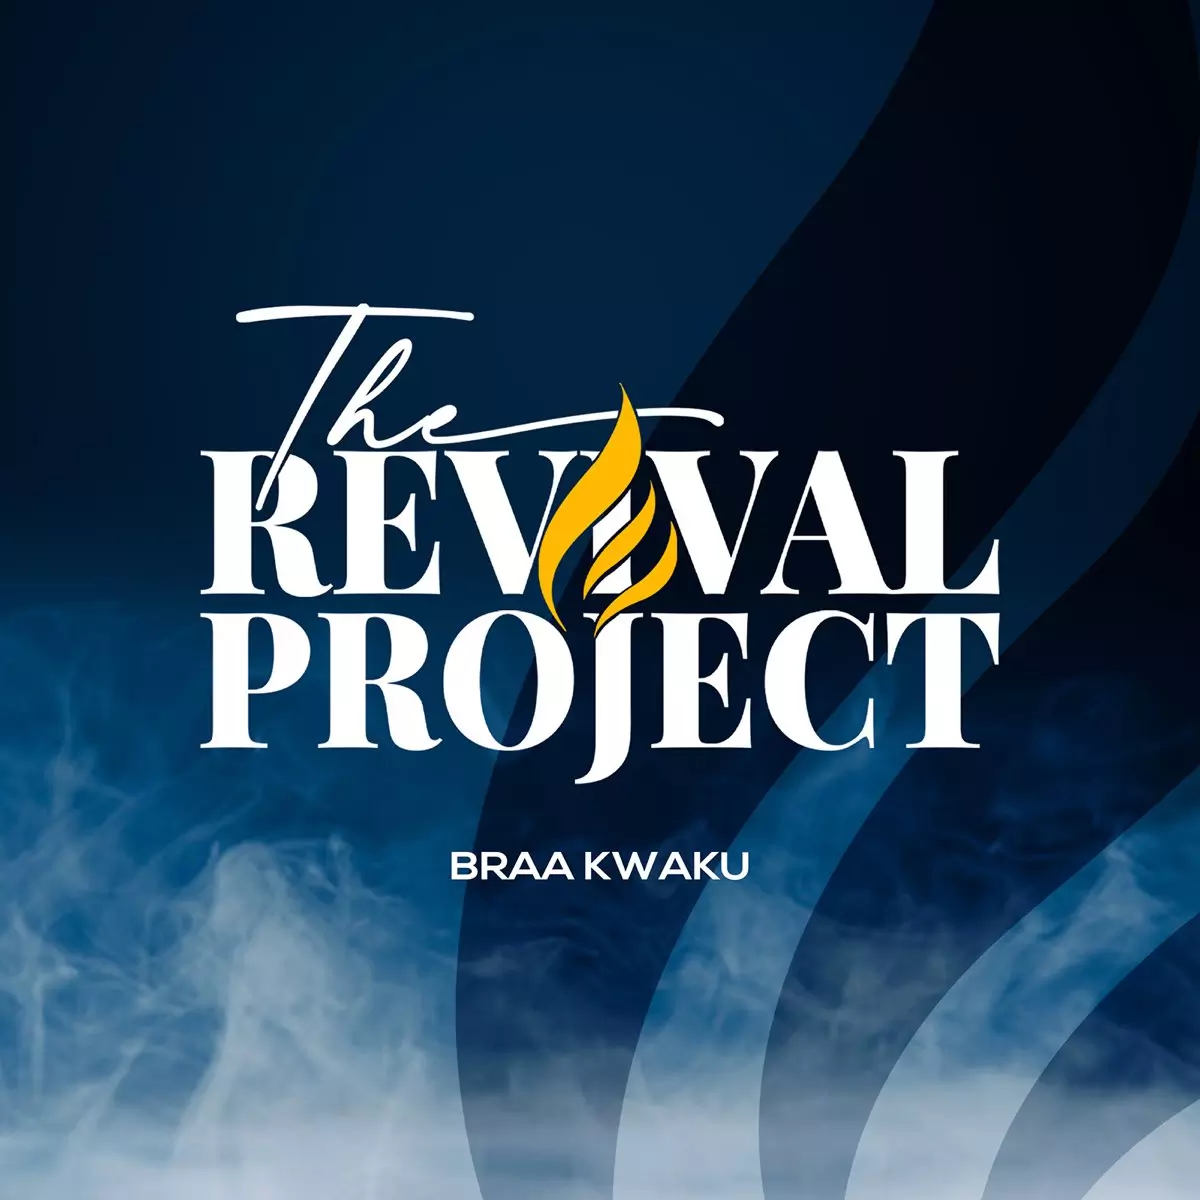 The Revival Project by Braa Kwaku on Apple Music